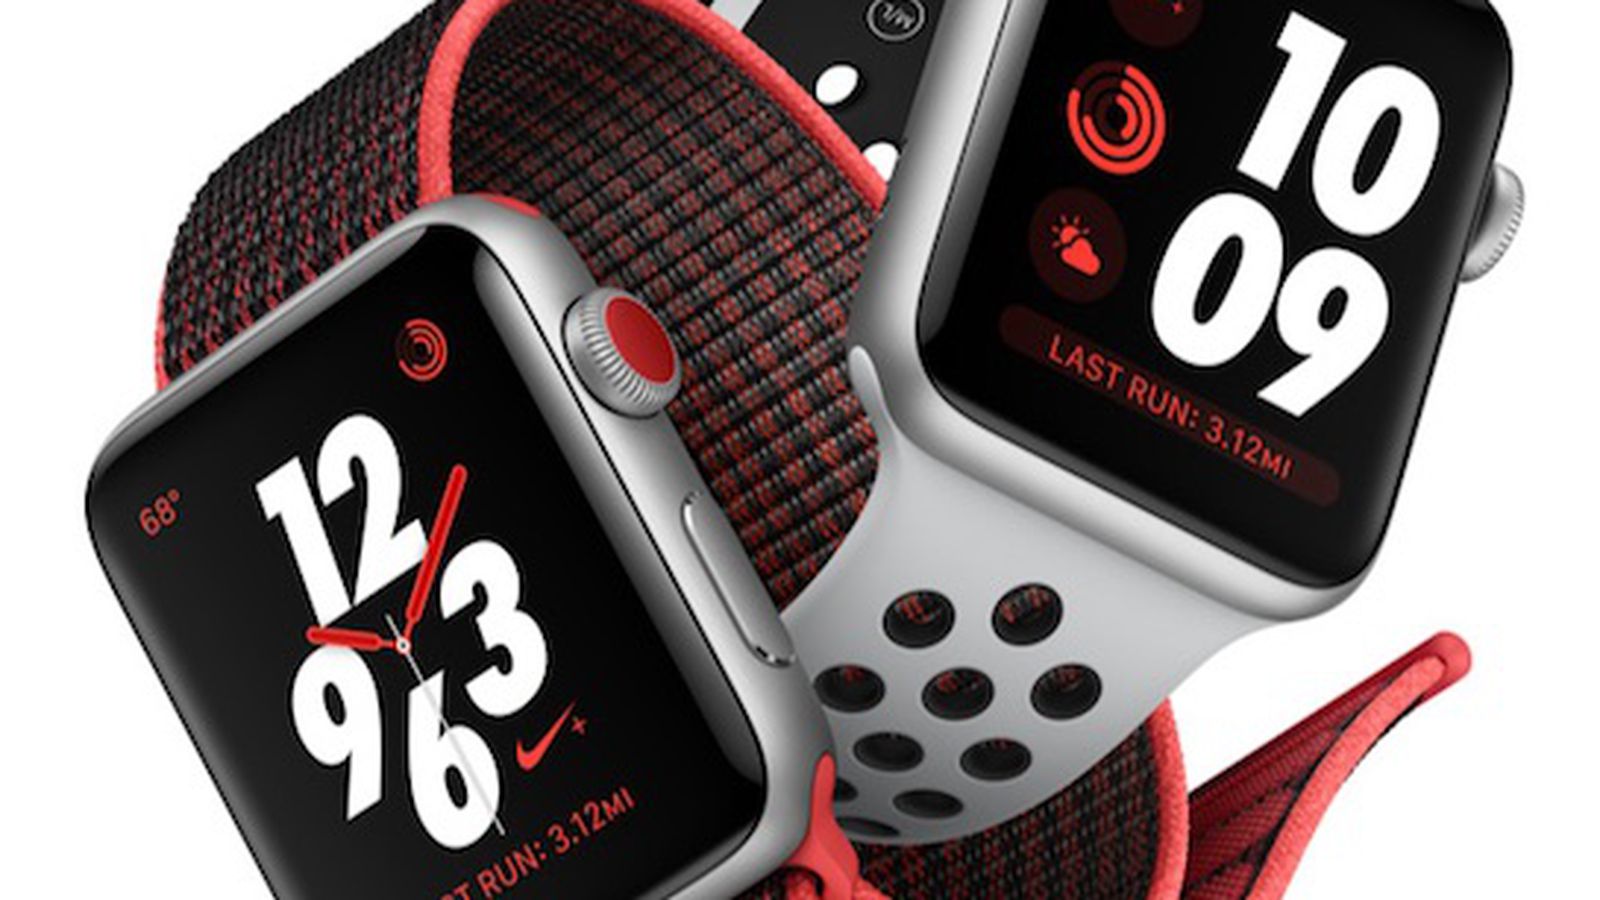 Apple Watch Series 3's Nike+ Models Have Slightly Later October 5